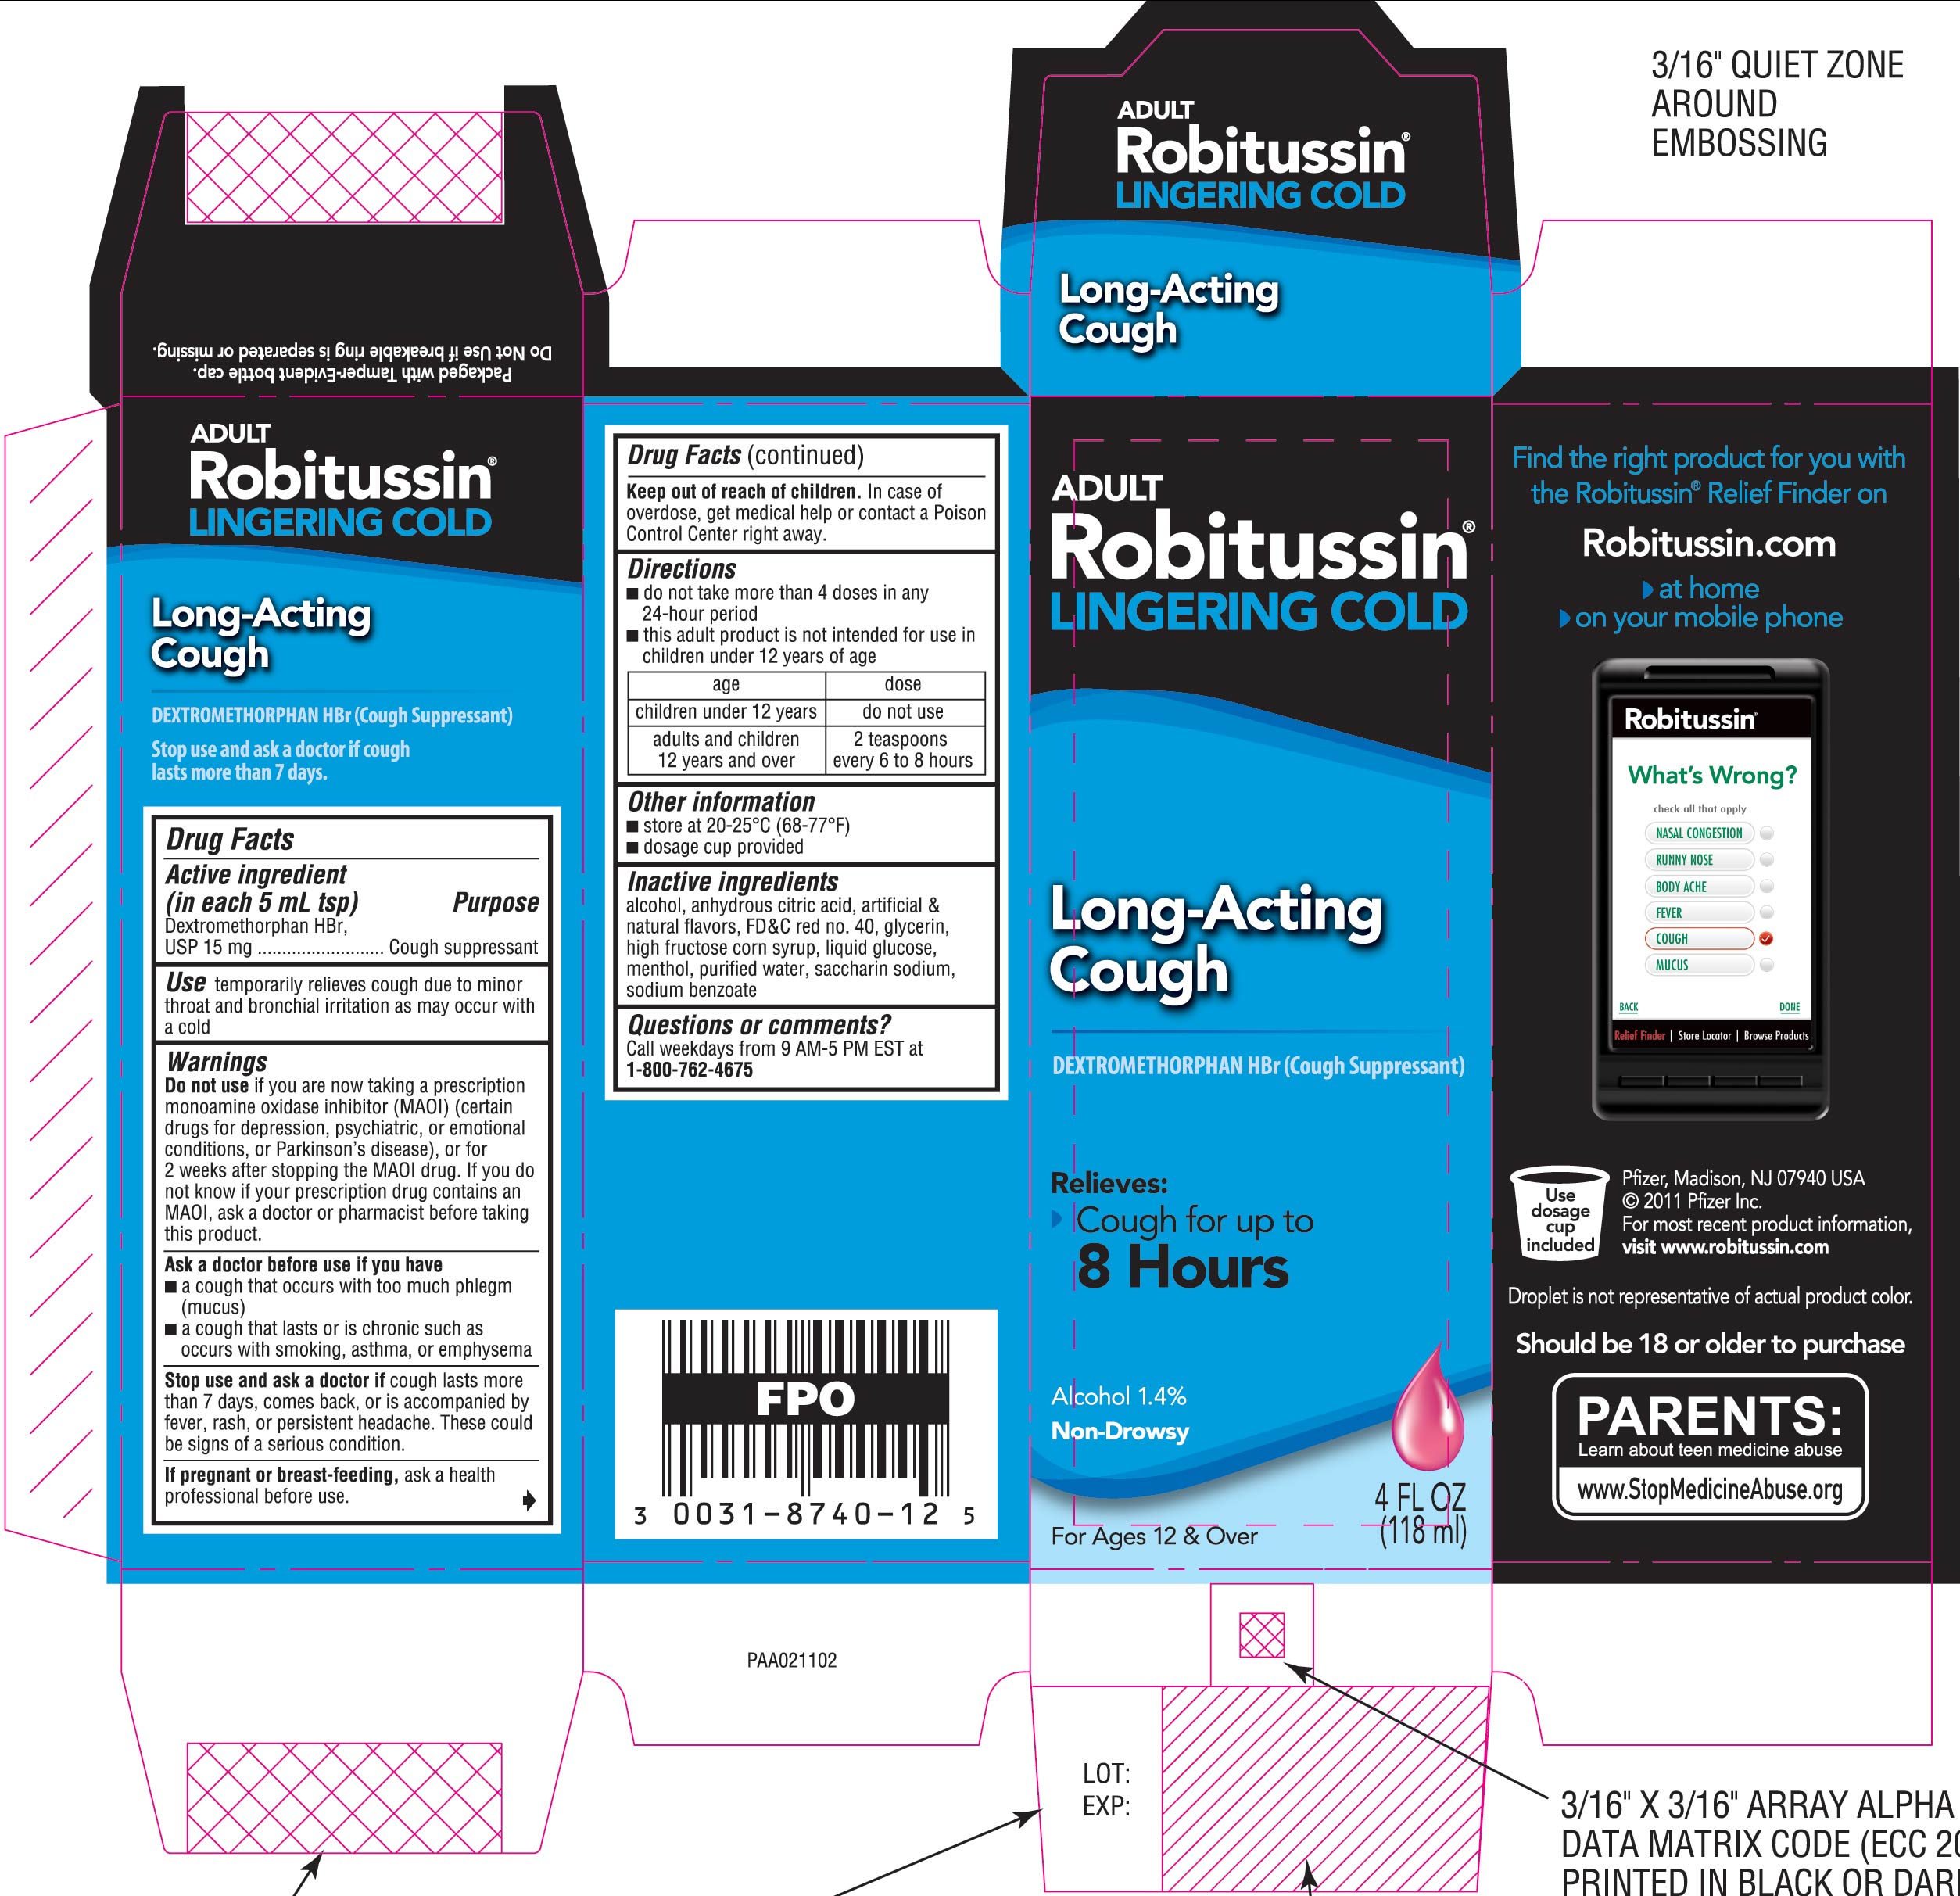 Robitussin Lingering Cold Long-Acting Cough Packaging